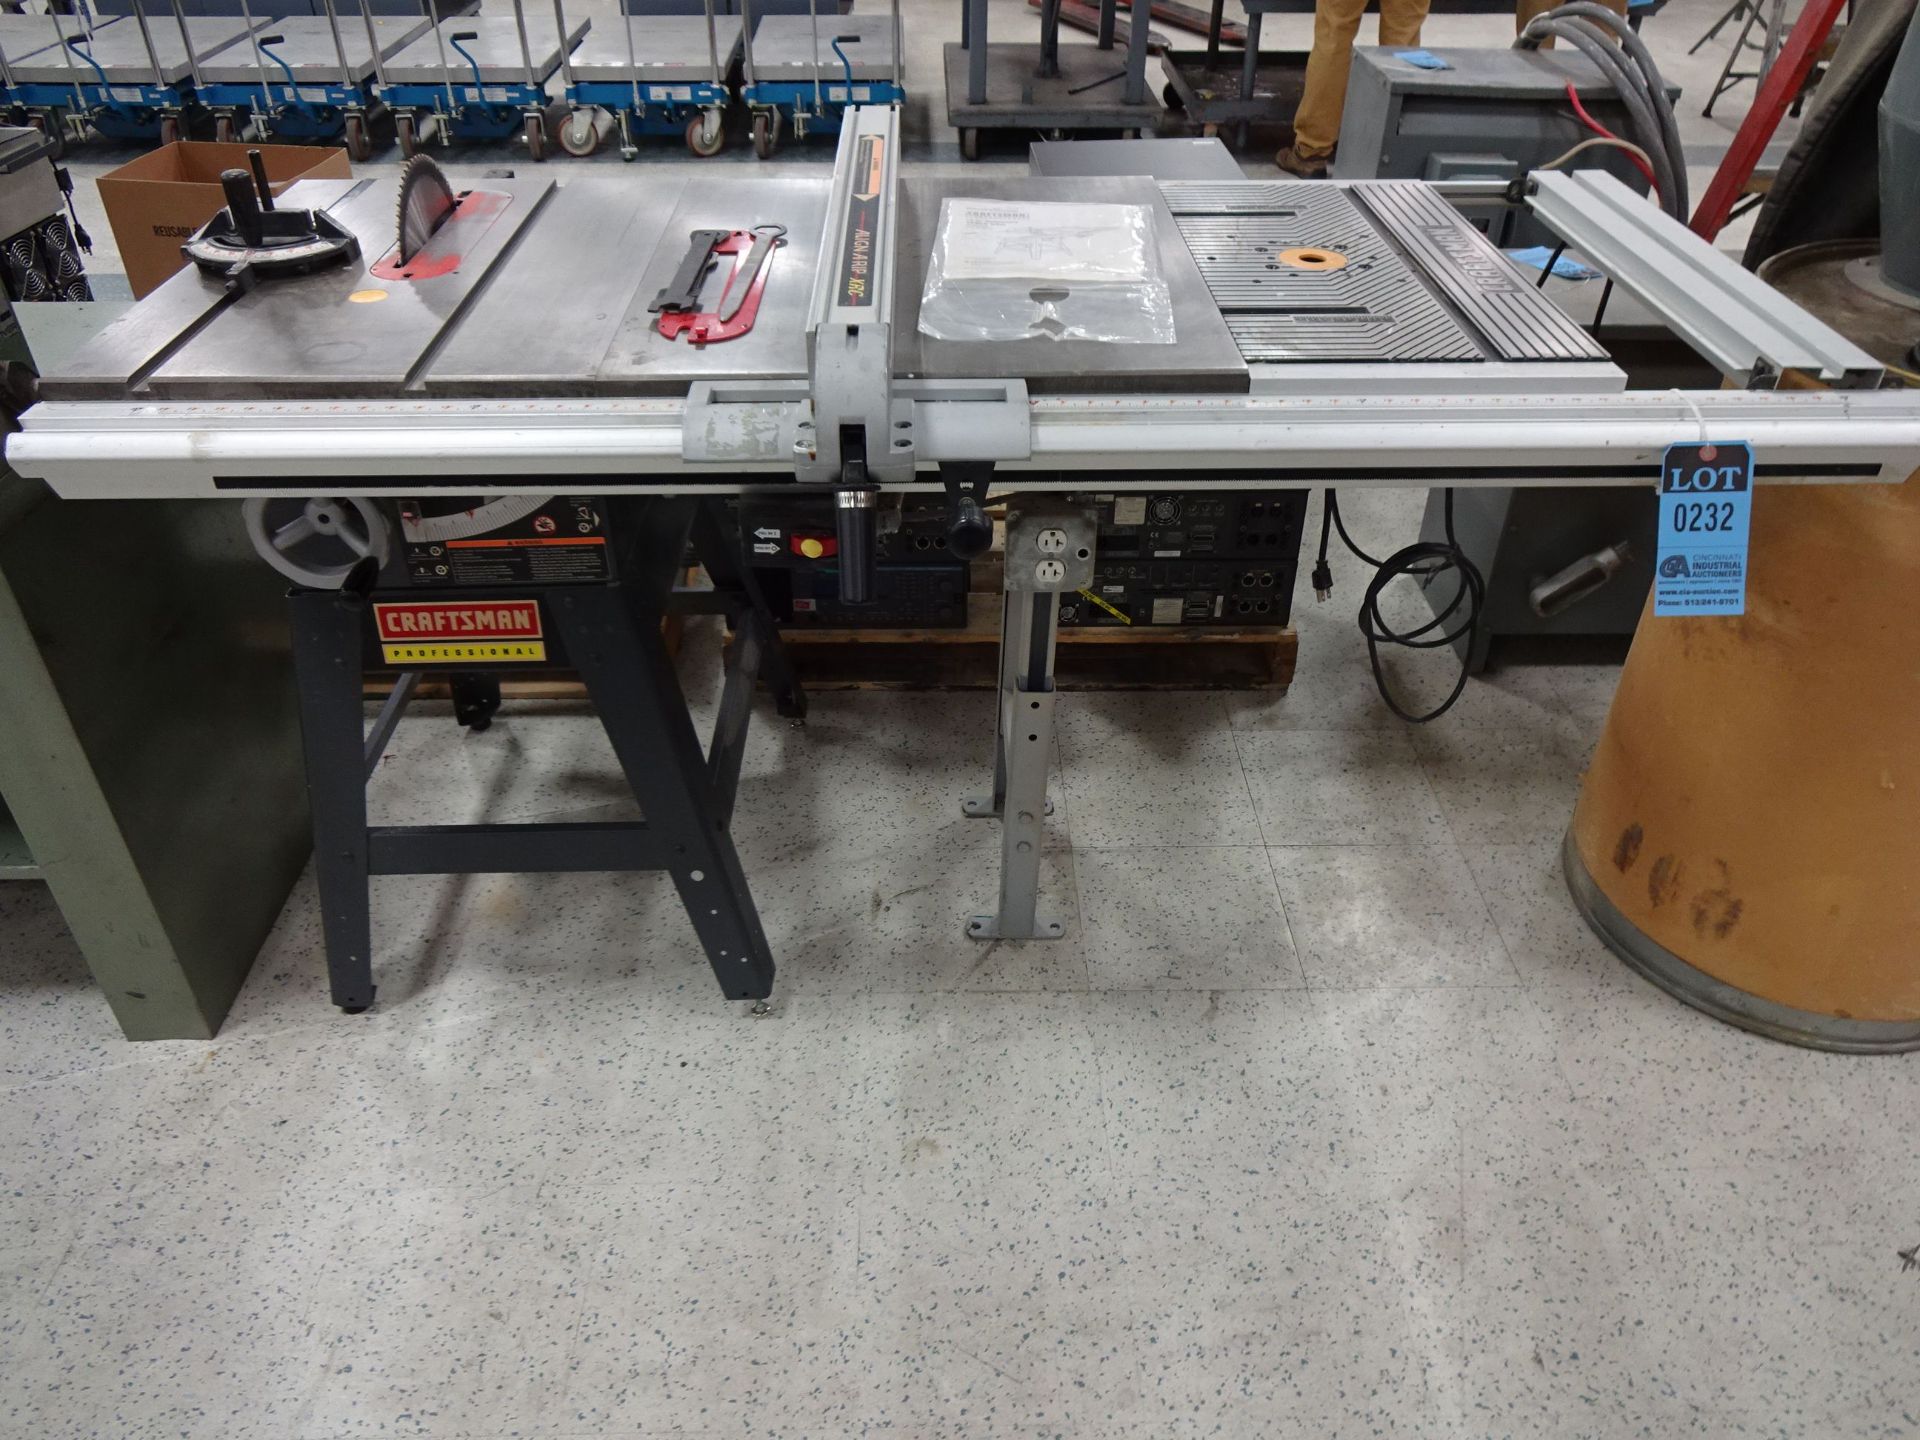 10" CRAFTSMAN MODEL 315.228510 STATIONARY TABLE SAW; S/N P9179.10415